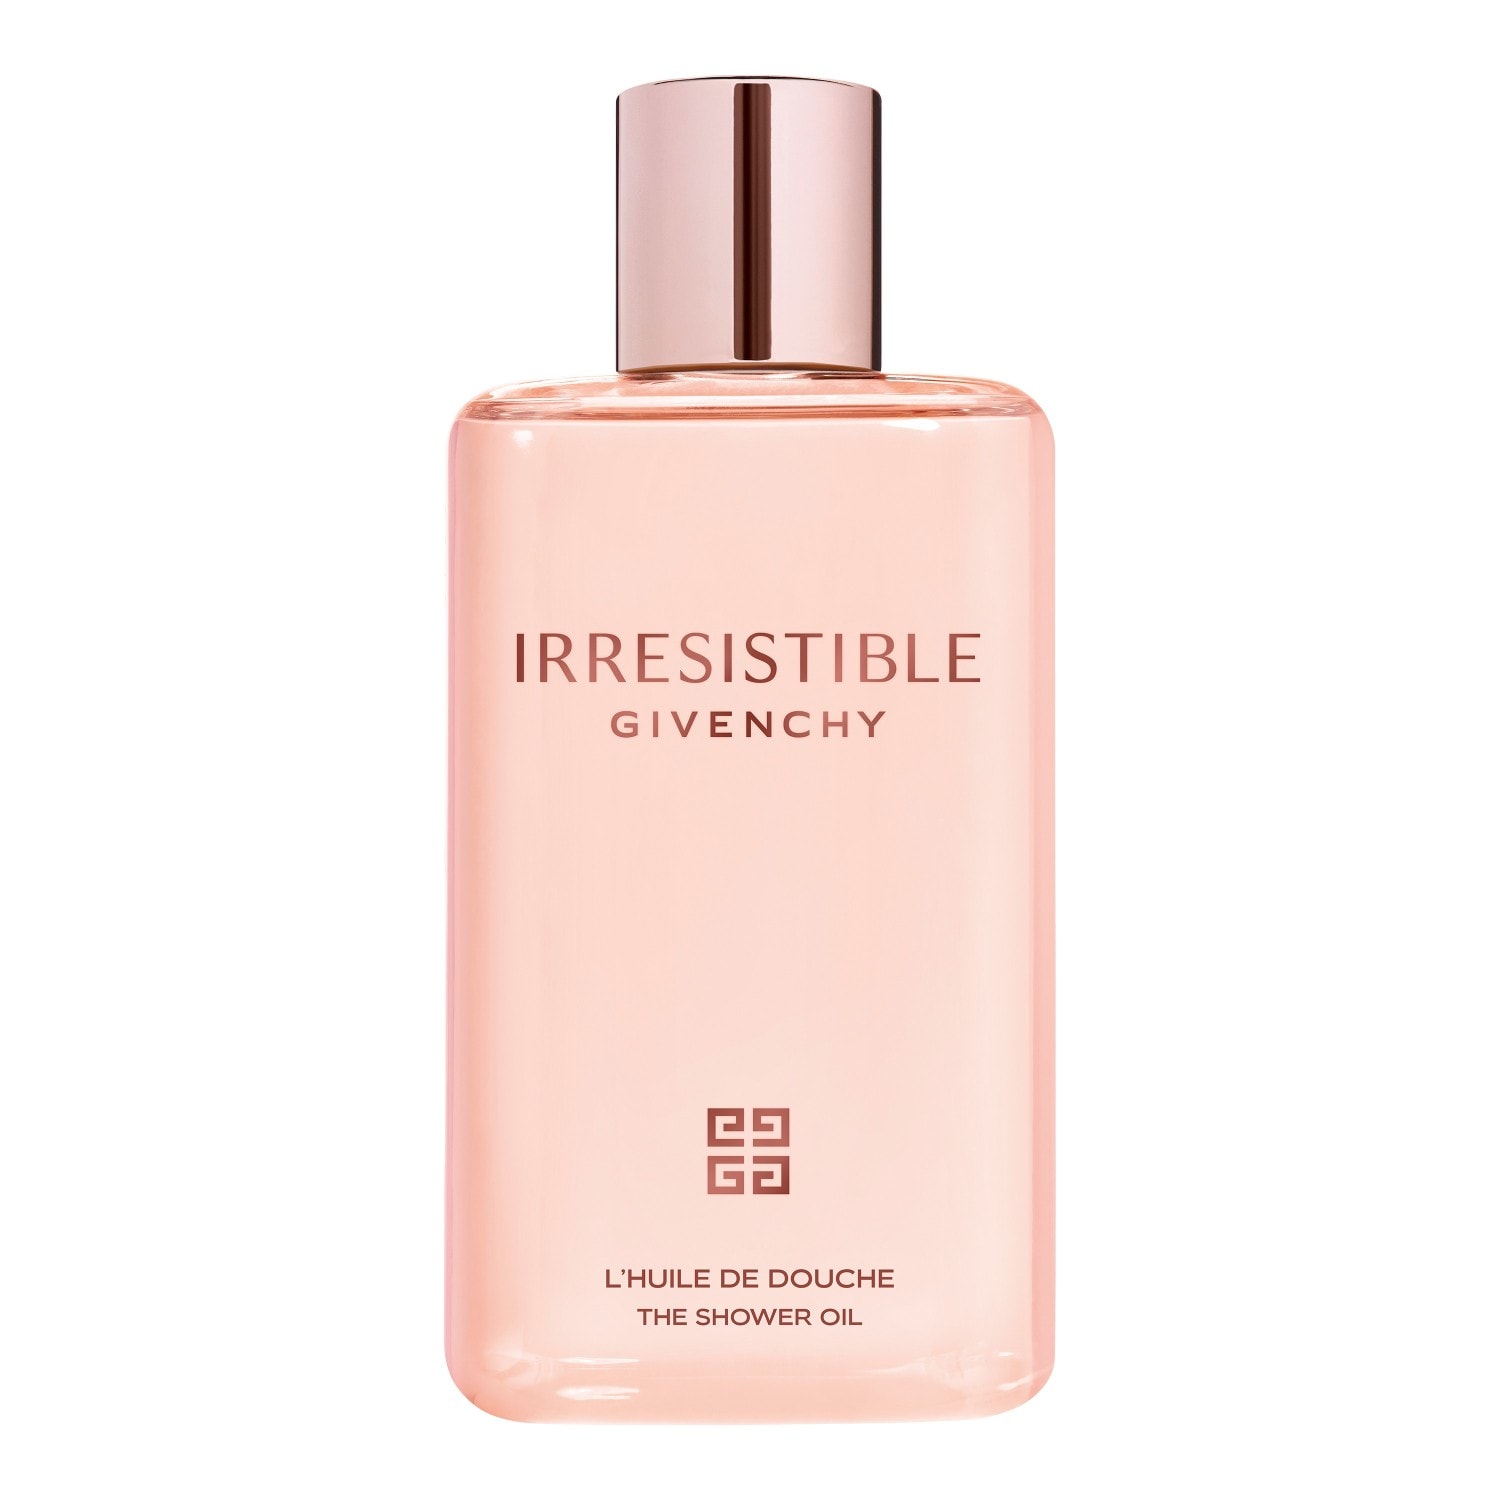 Irresistible Givenchy The Shower Oil